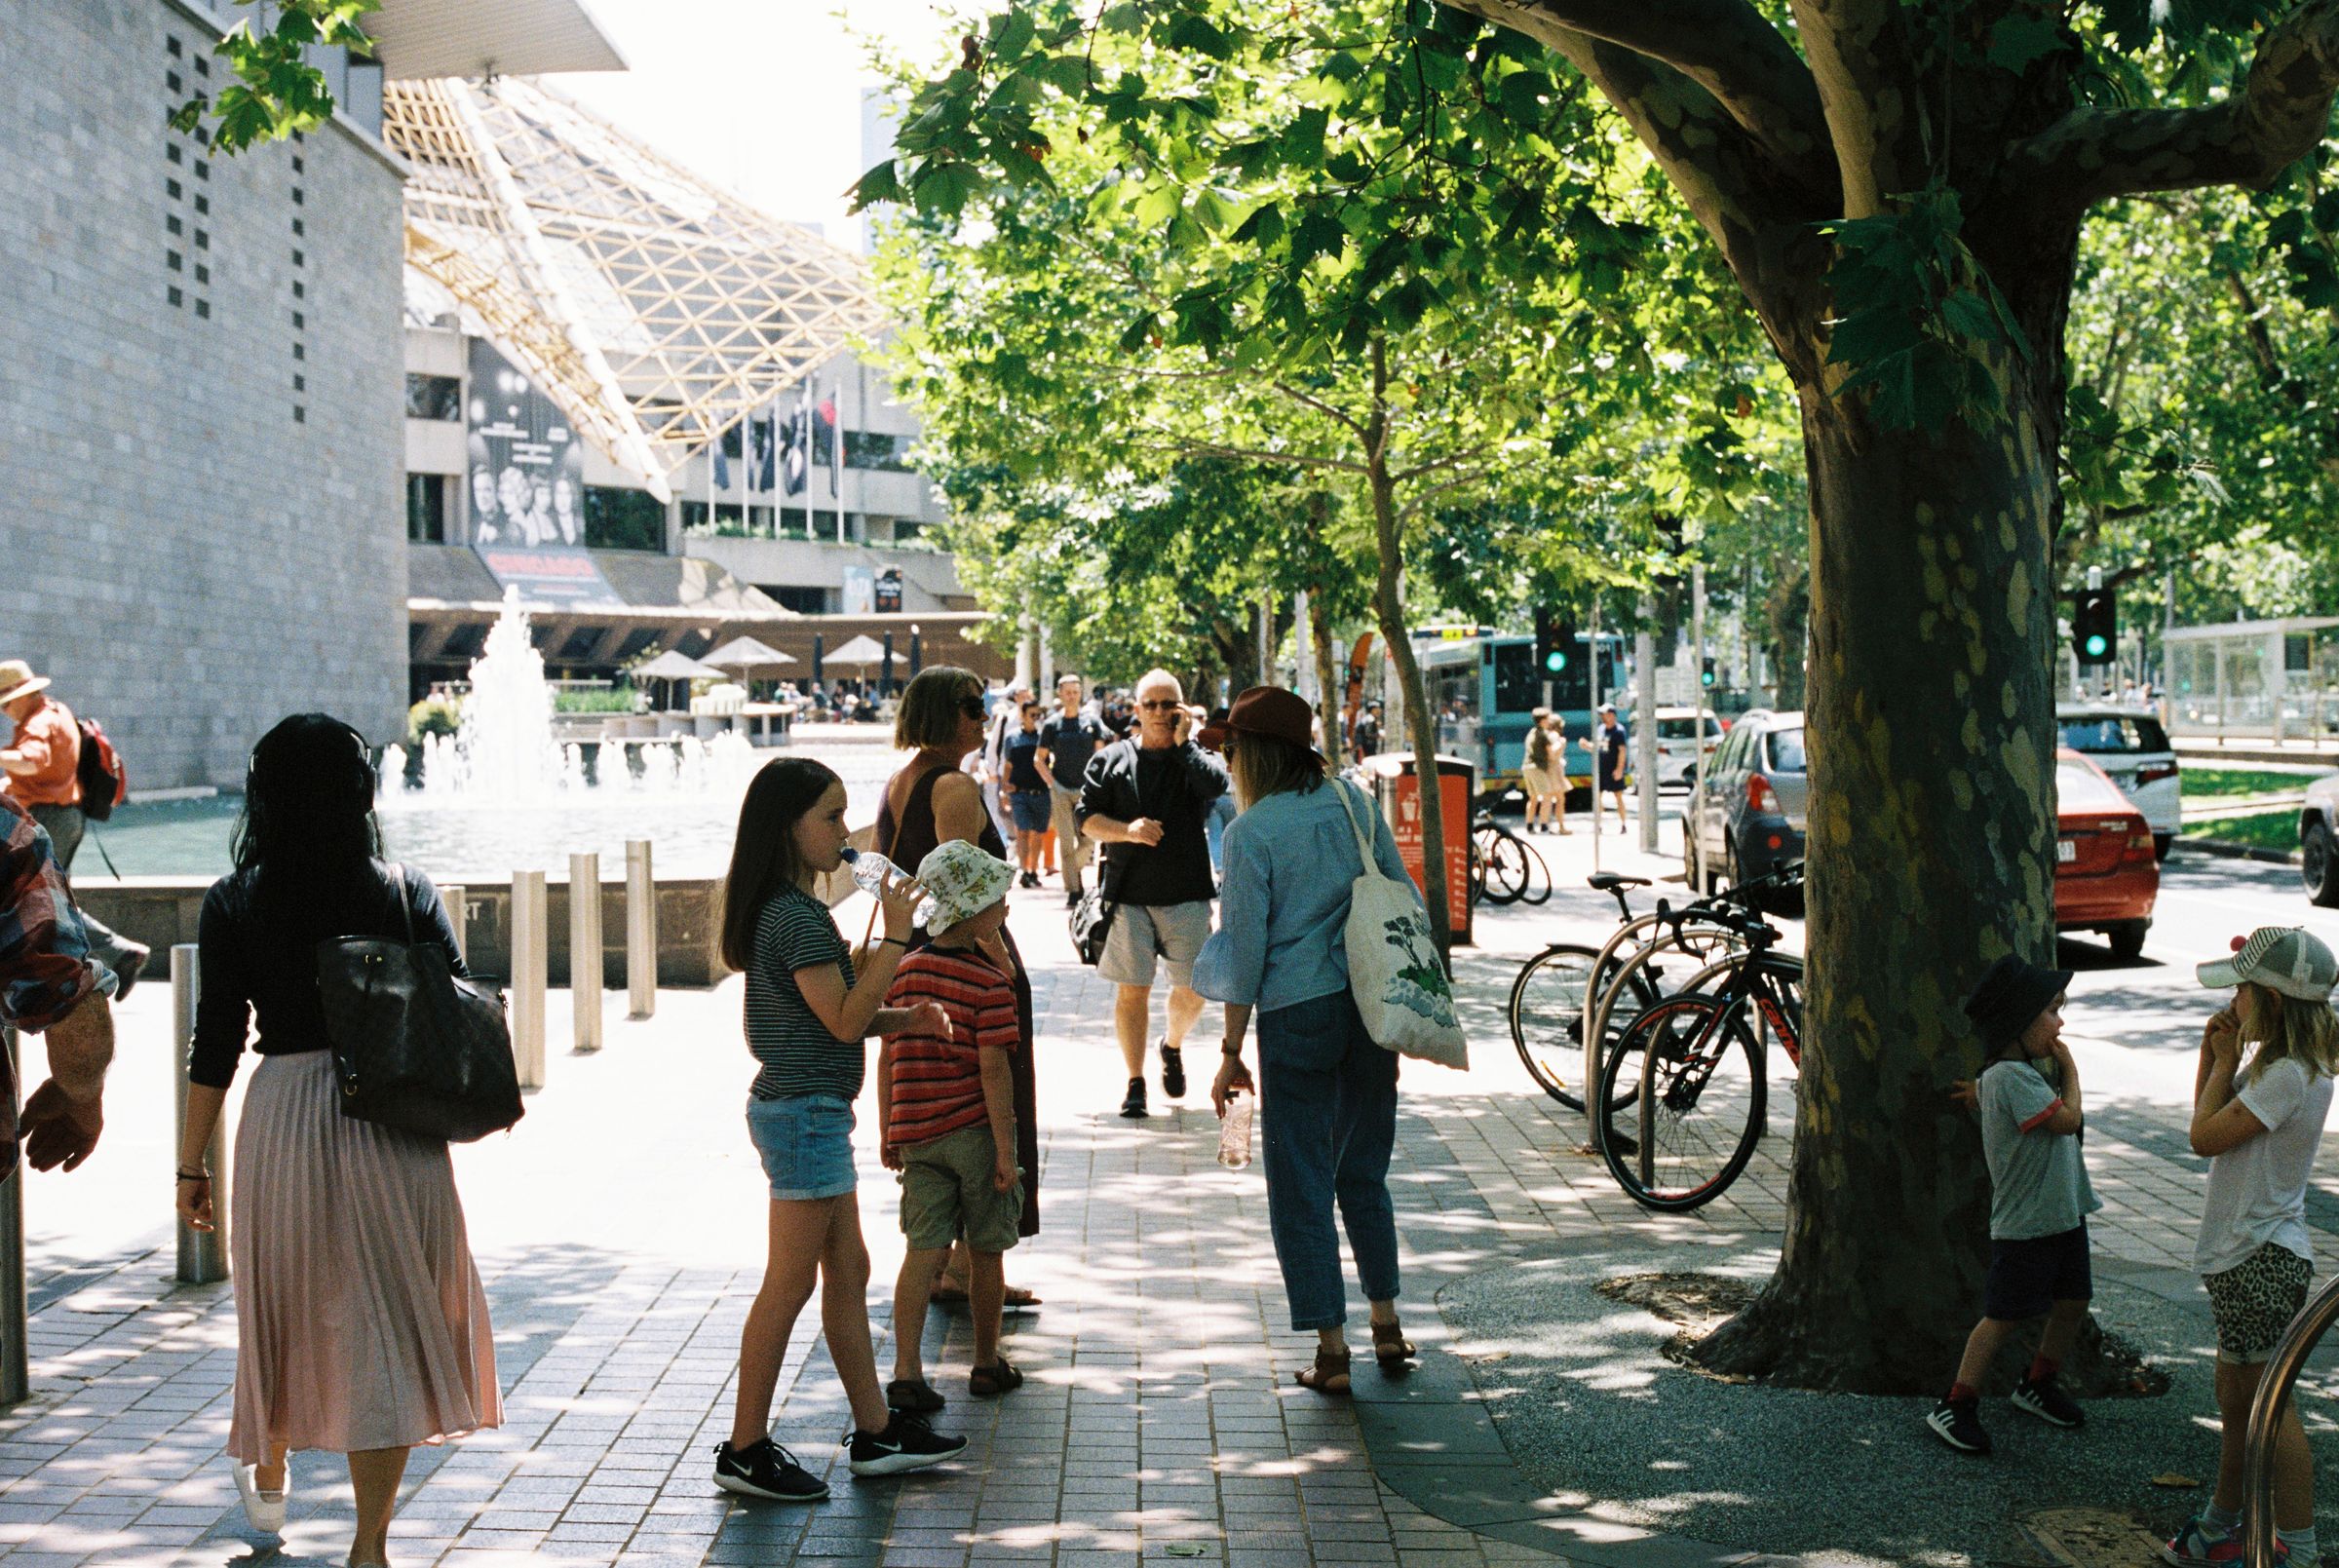 A photo of a paved street scape beside a fountain with people of all ages walking and standing. Children in hats stand in the shade of trees and bikes are parked to the side.